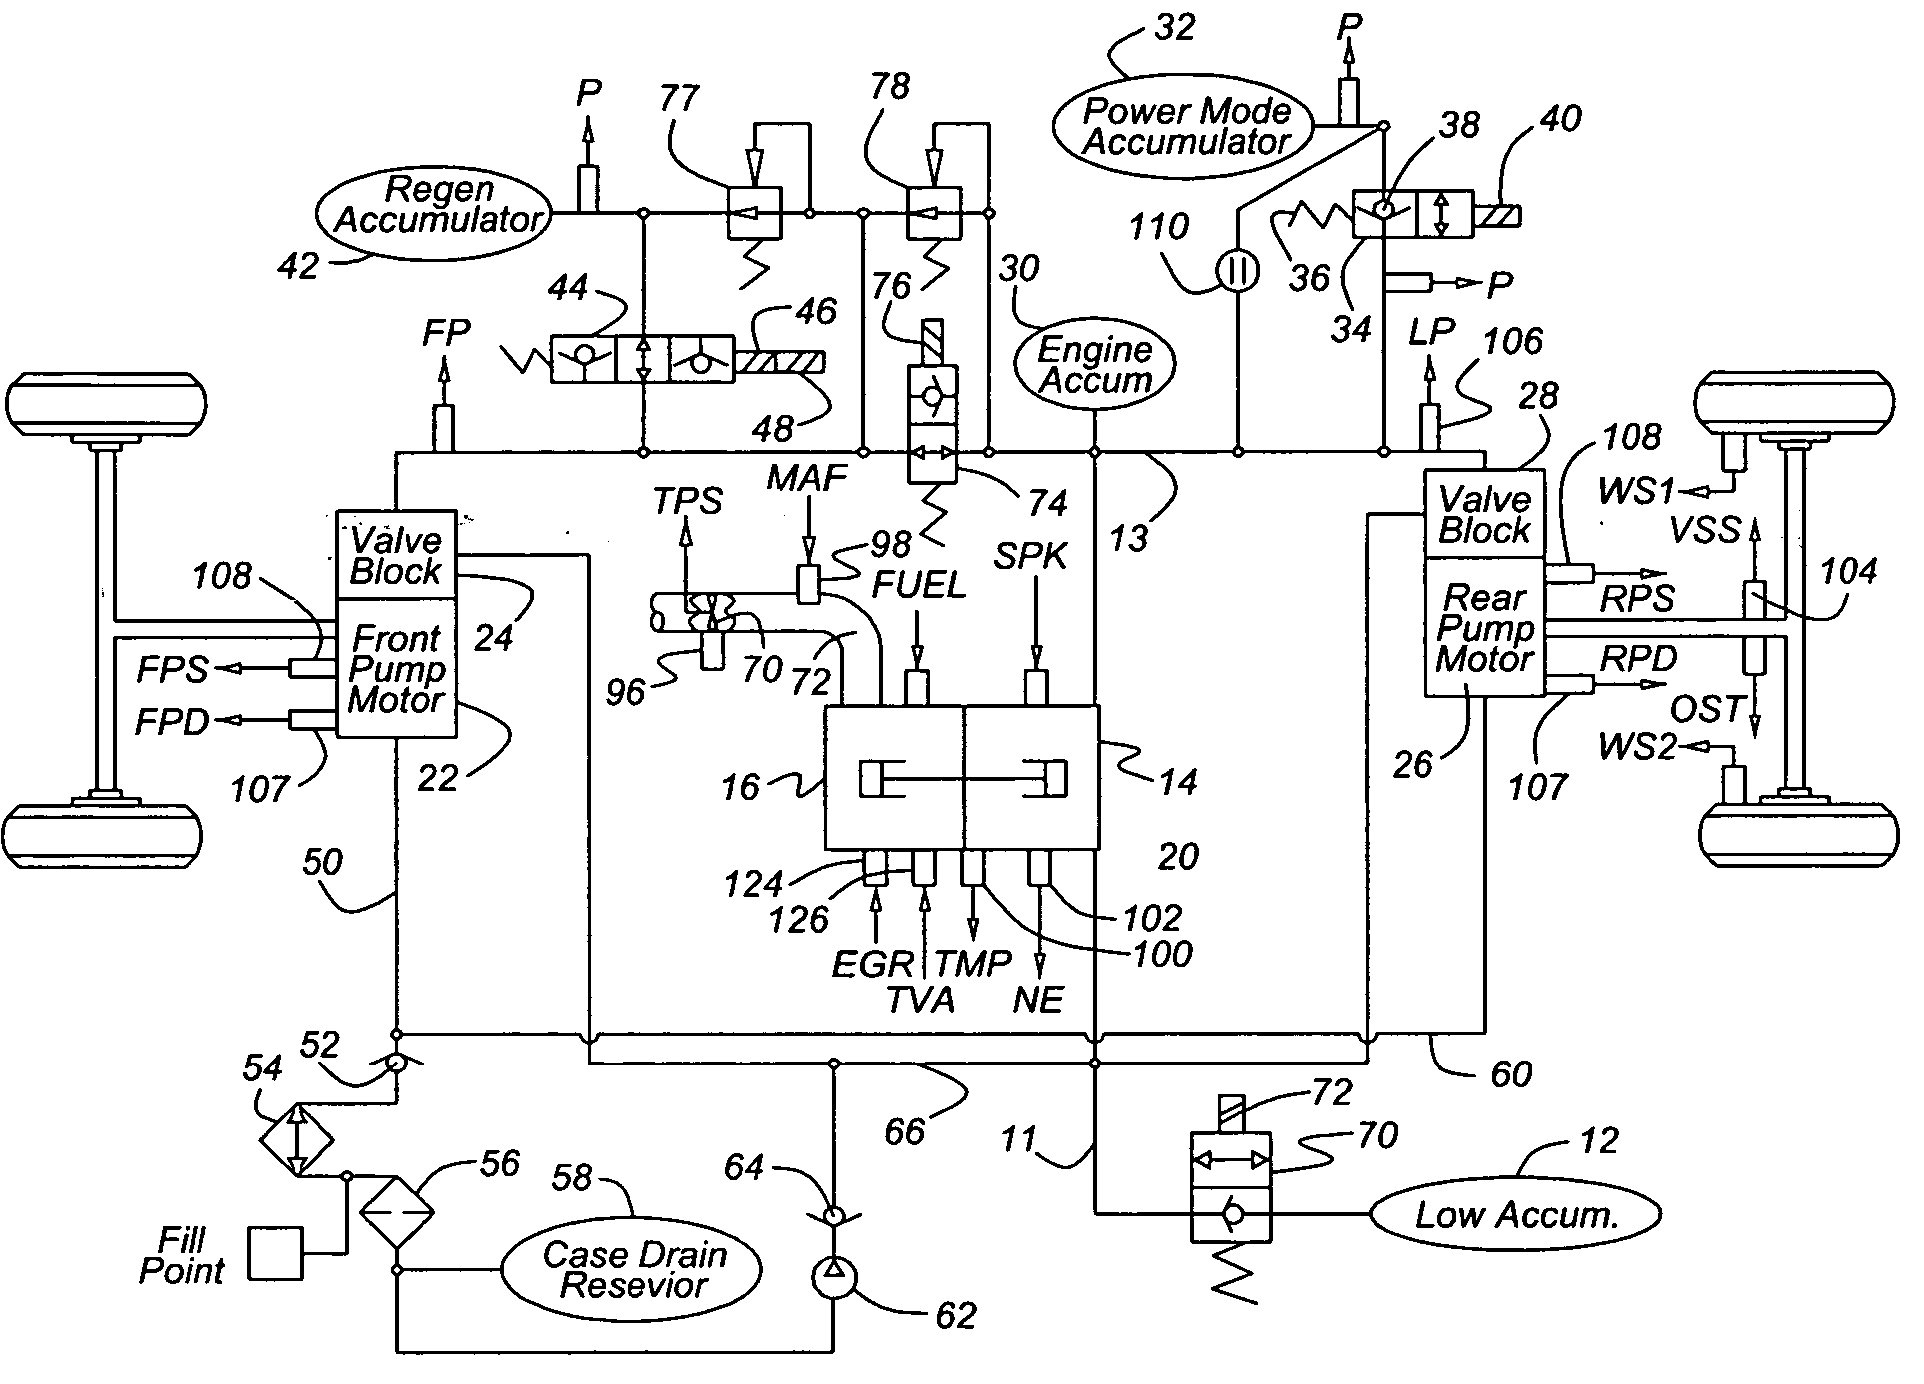 Multiple pressure mode operation for hydraulic hybrid vehicle powertrain